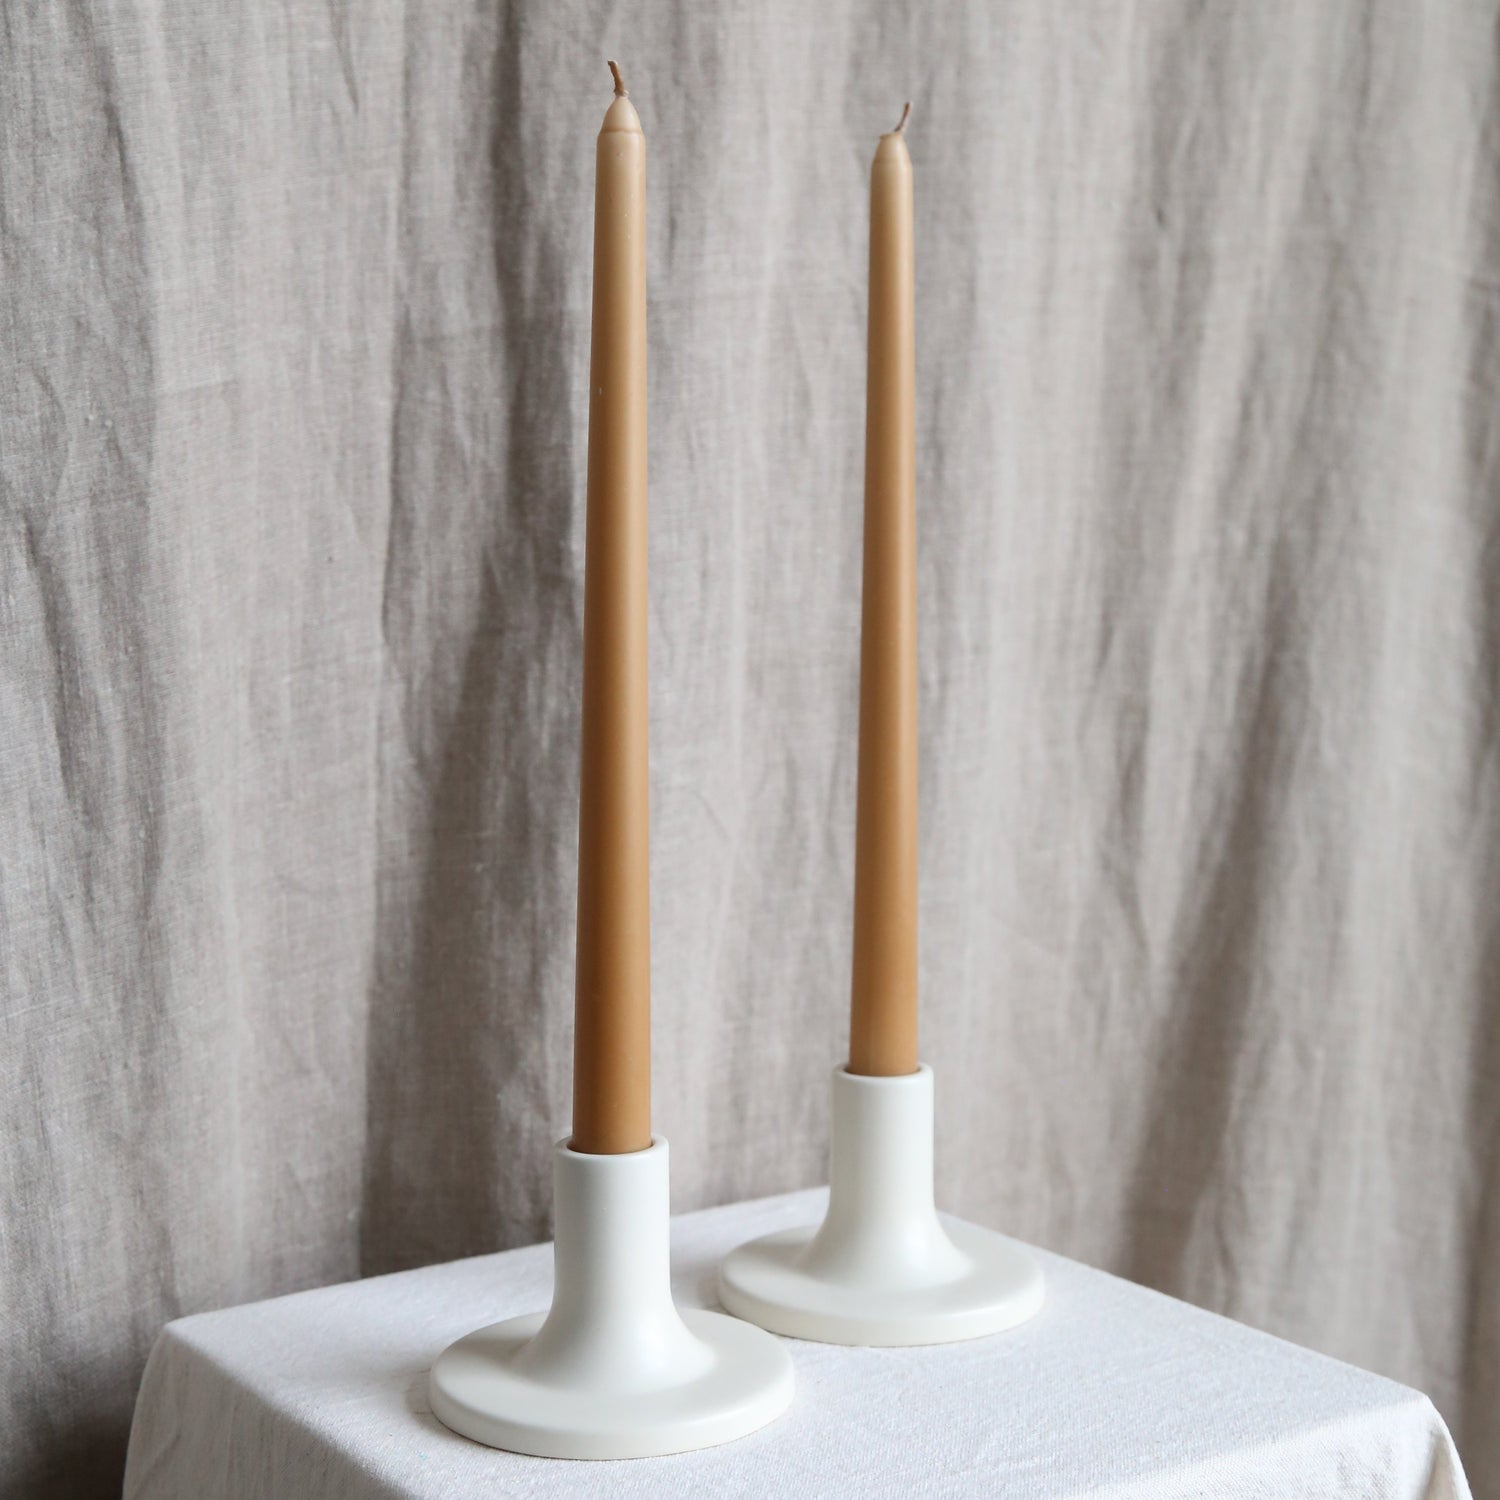 Pair of caramel taper candles in white holders available at Rook & Rose.